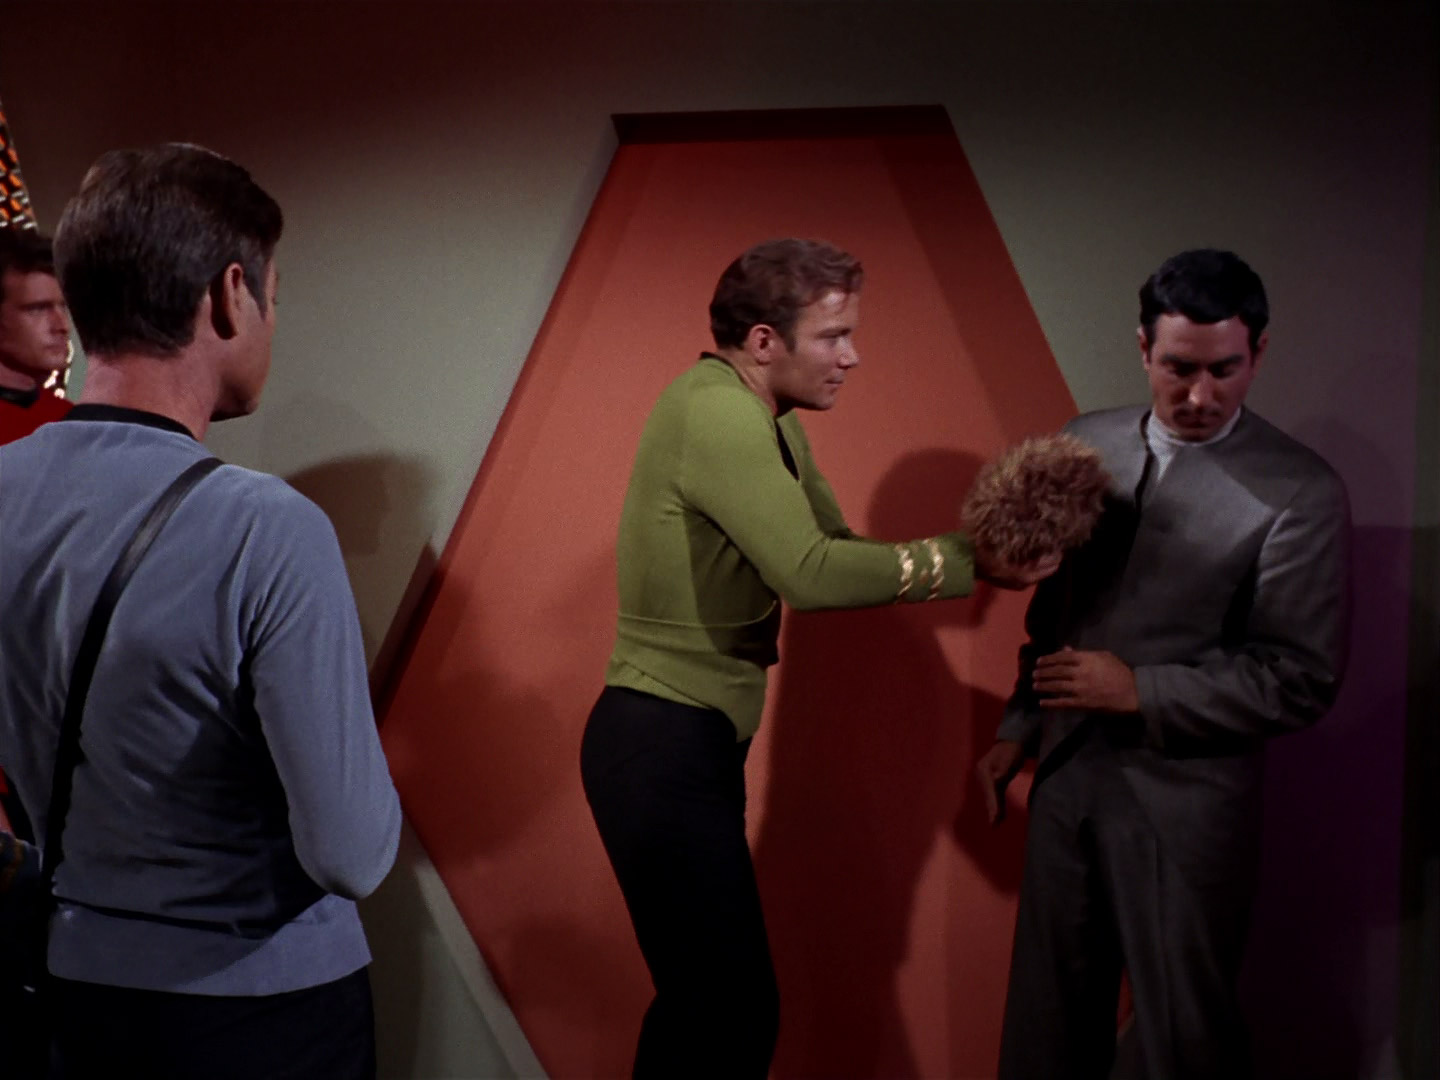 https://tos.trekcore.com/gallery/albums/screencaps/season2/213-trouble-with-tribbles/trouble-with-tribbles-806.jpg